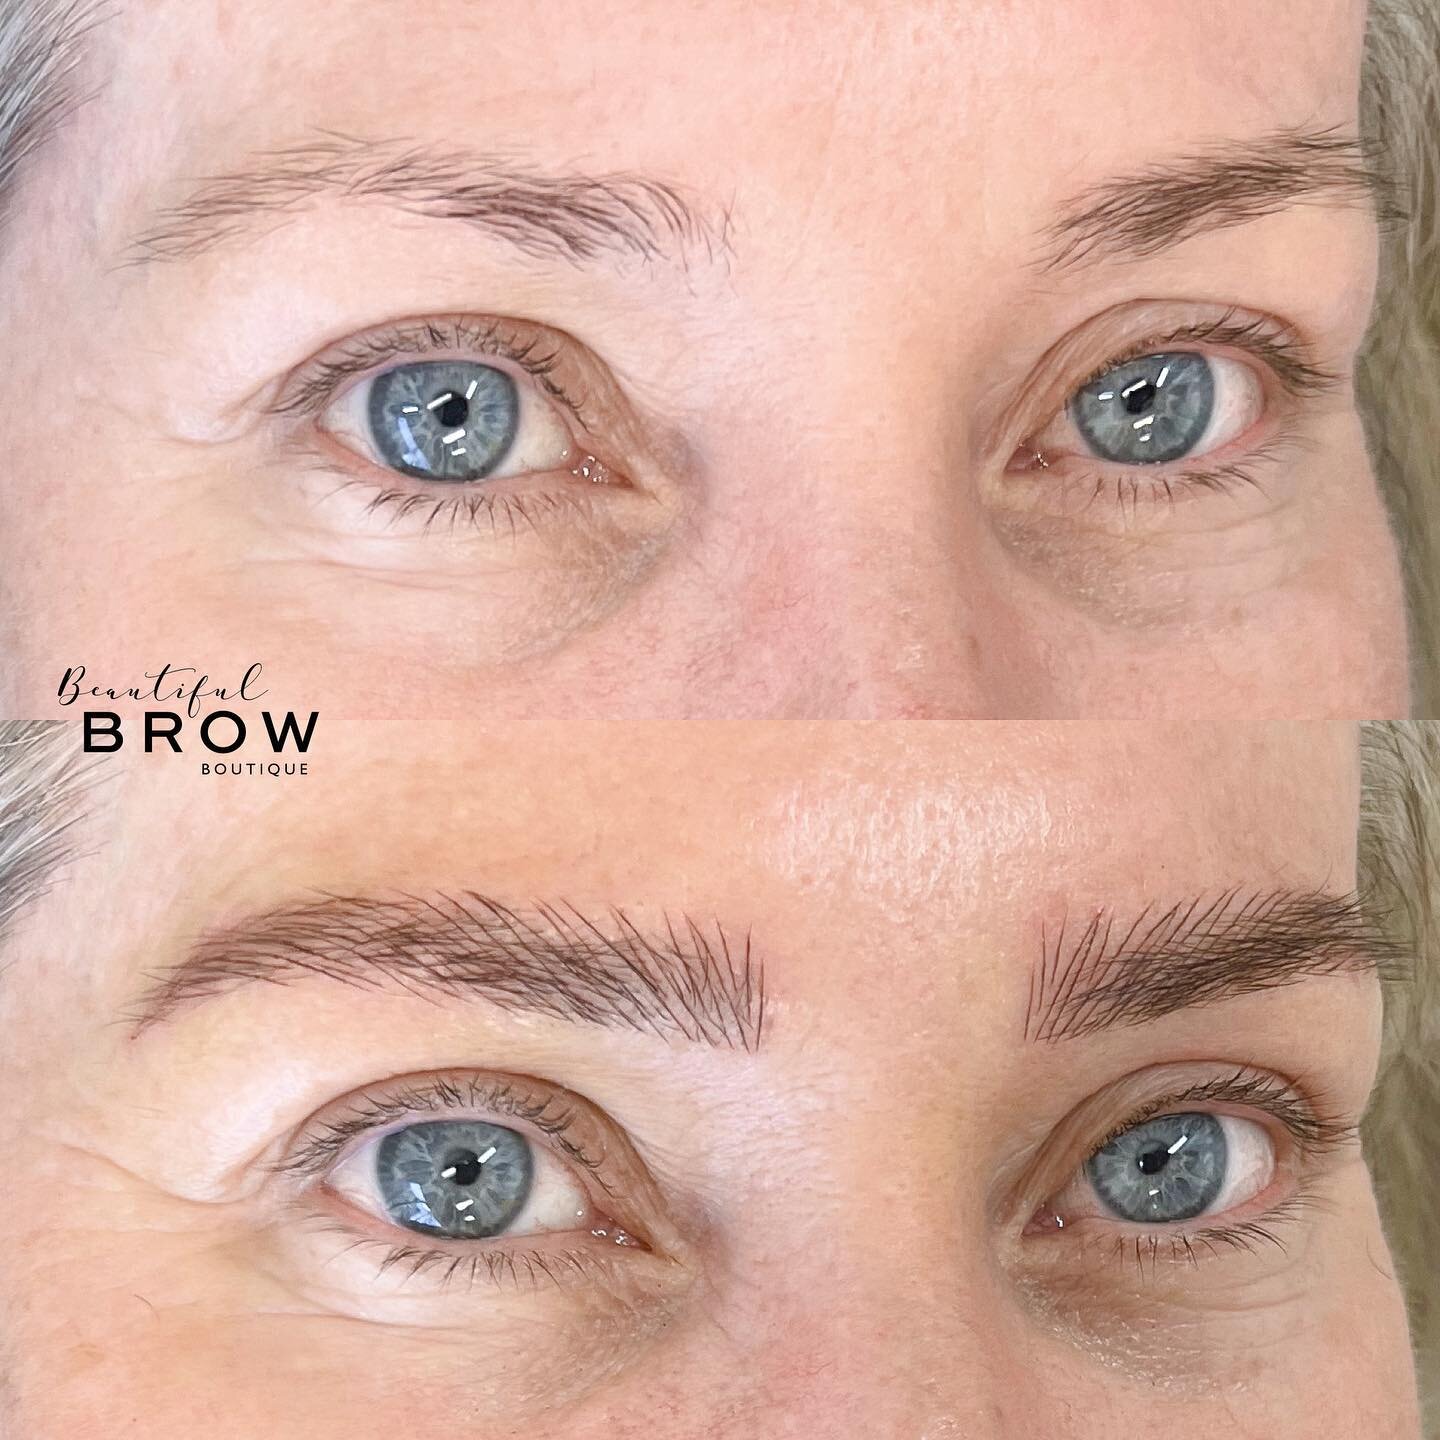 Our most popular style of brow at the moment ❣️ A more relaxed textured and loose feather brow. Book now for our signature bespoke brows . Link in bio 💫

#microbladinggoldcoast #microbladingbrisbane #microblading #feathertouchbrowsgoldcoast #feather